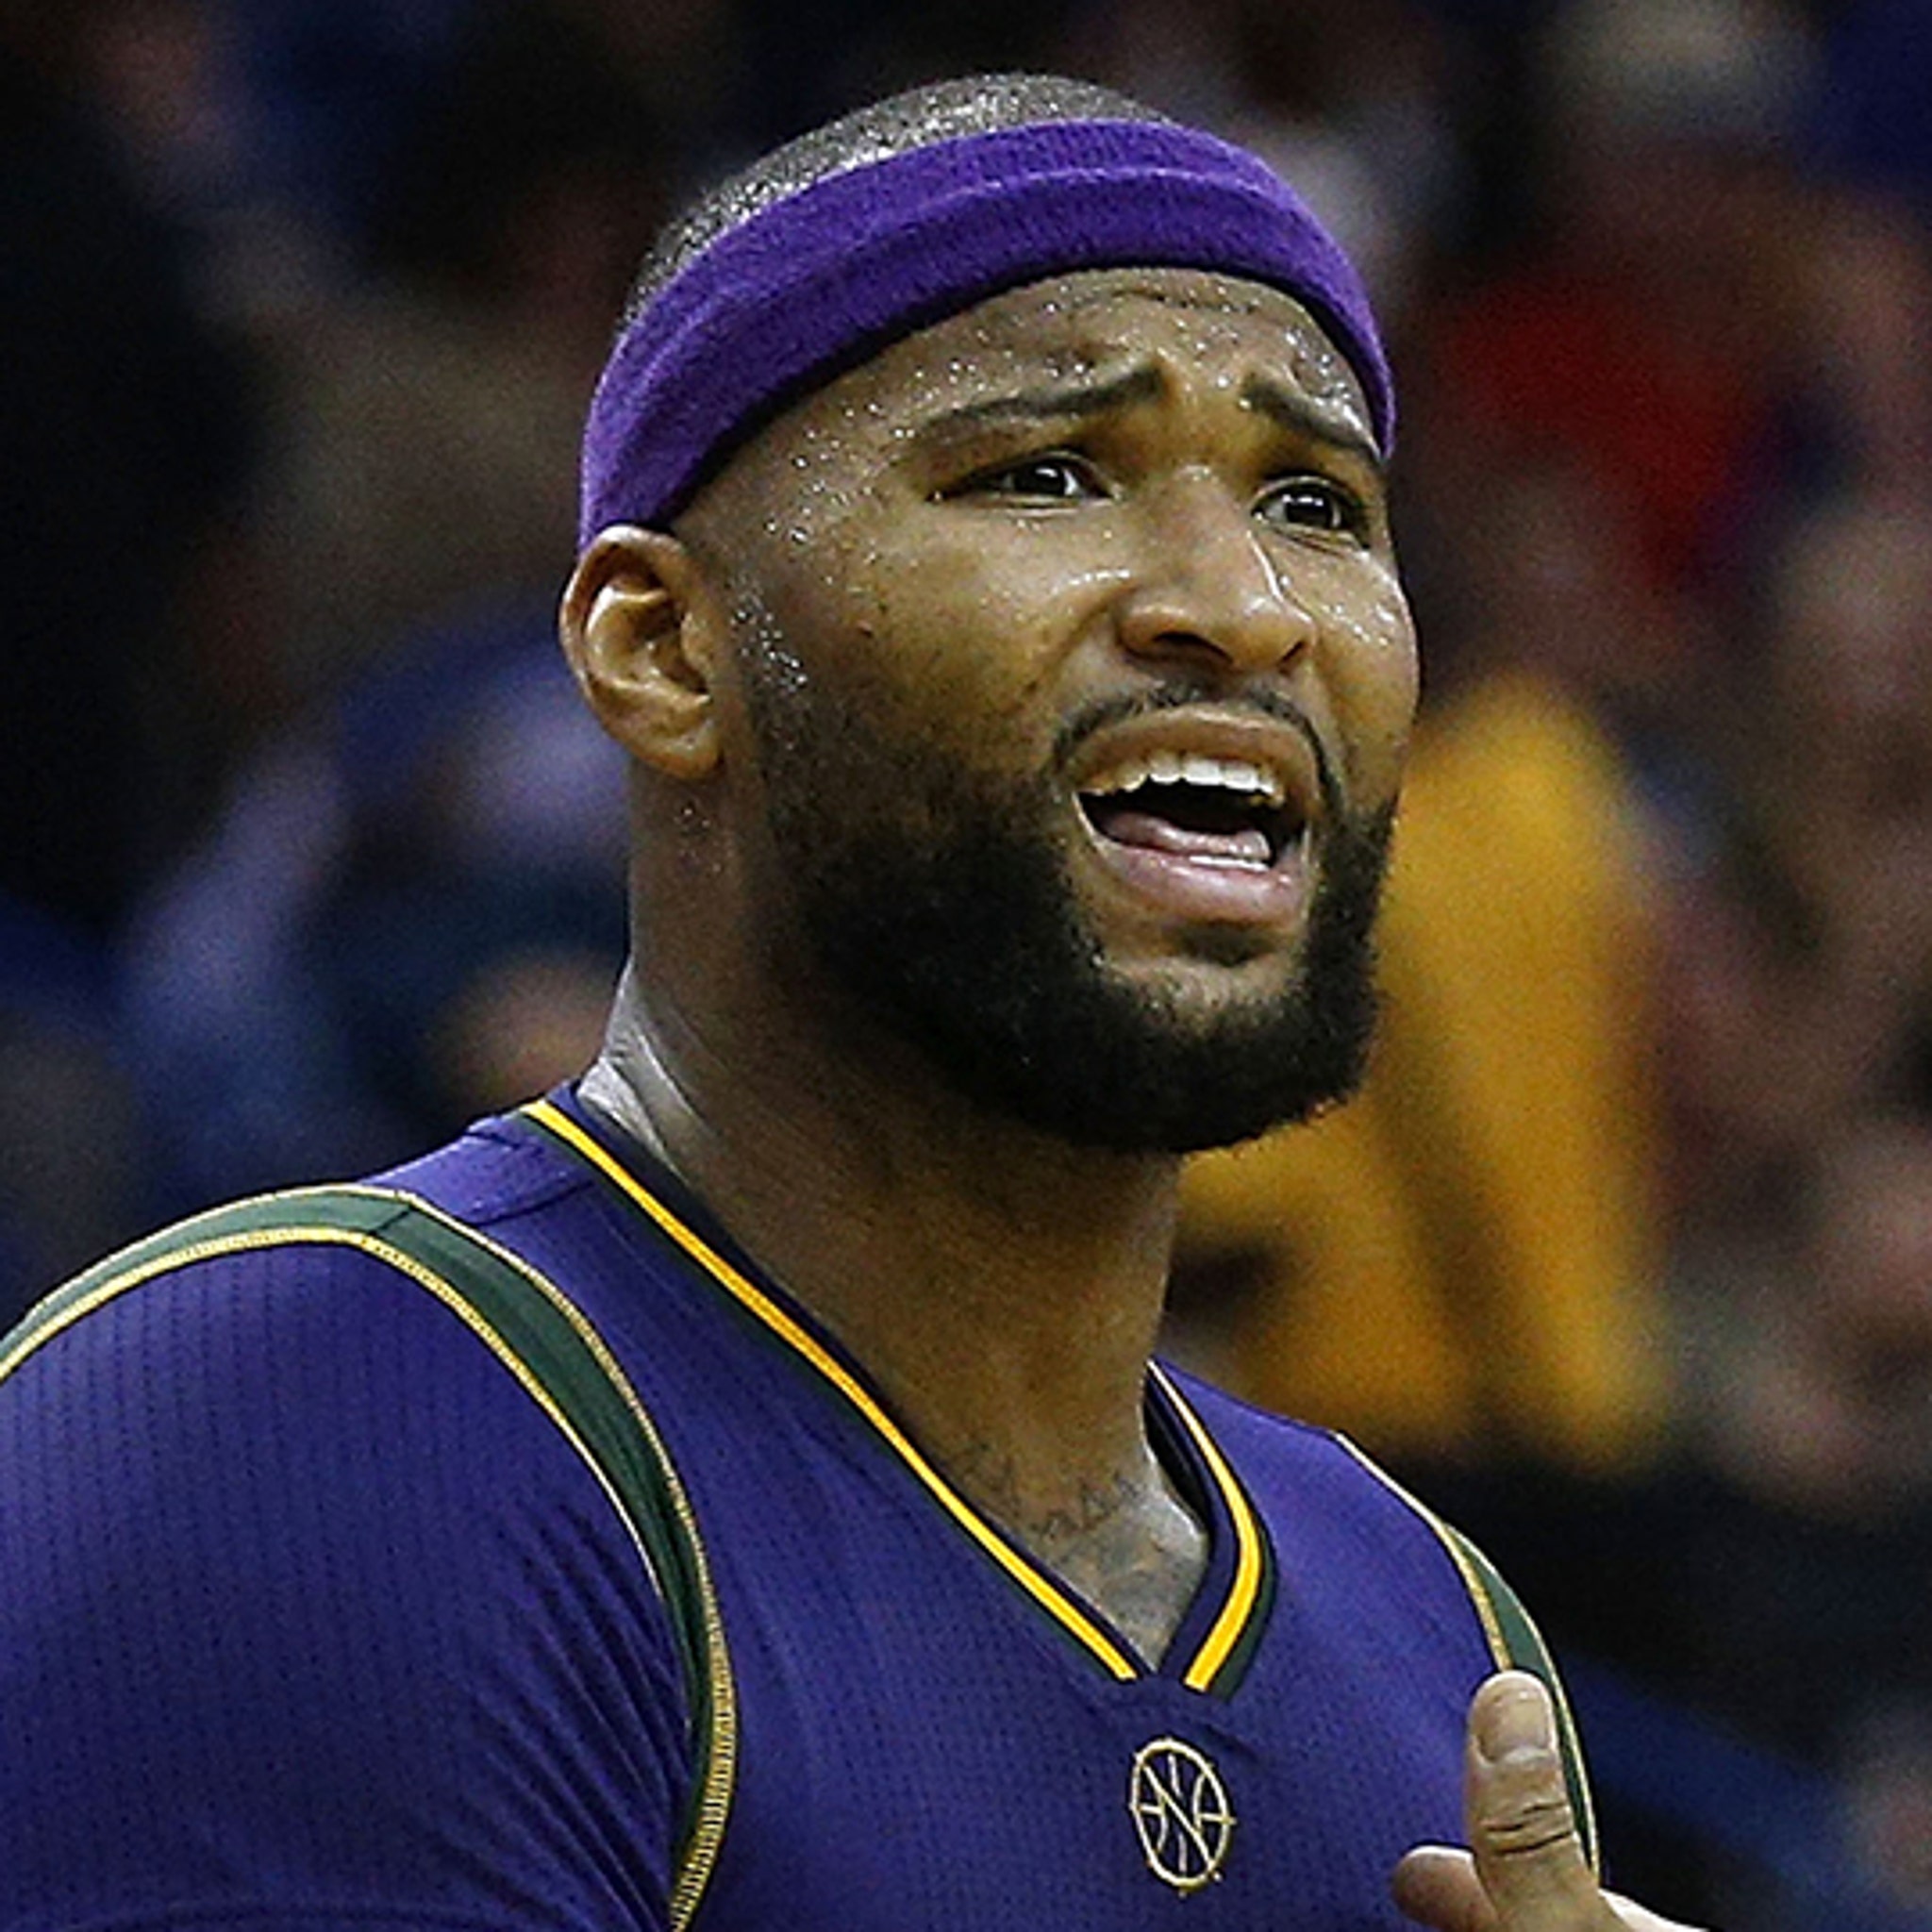 DeMarcus Cousins has epic rant after scoring 55 points - Sports Illustrated